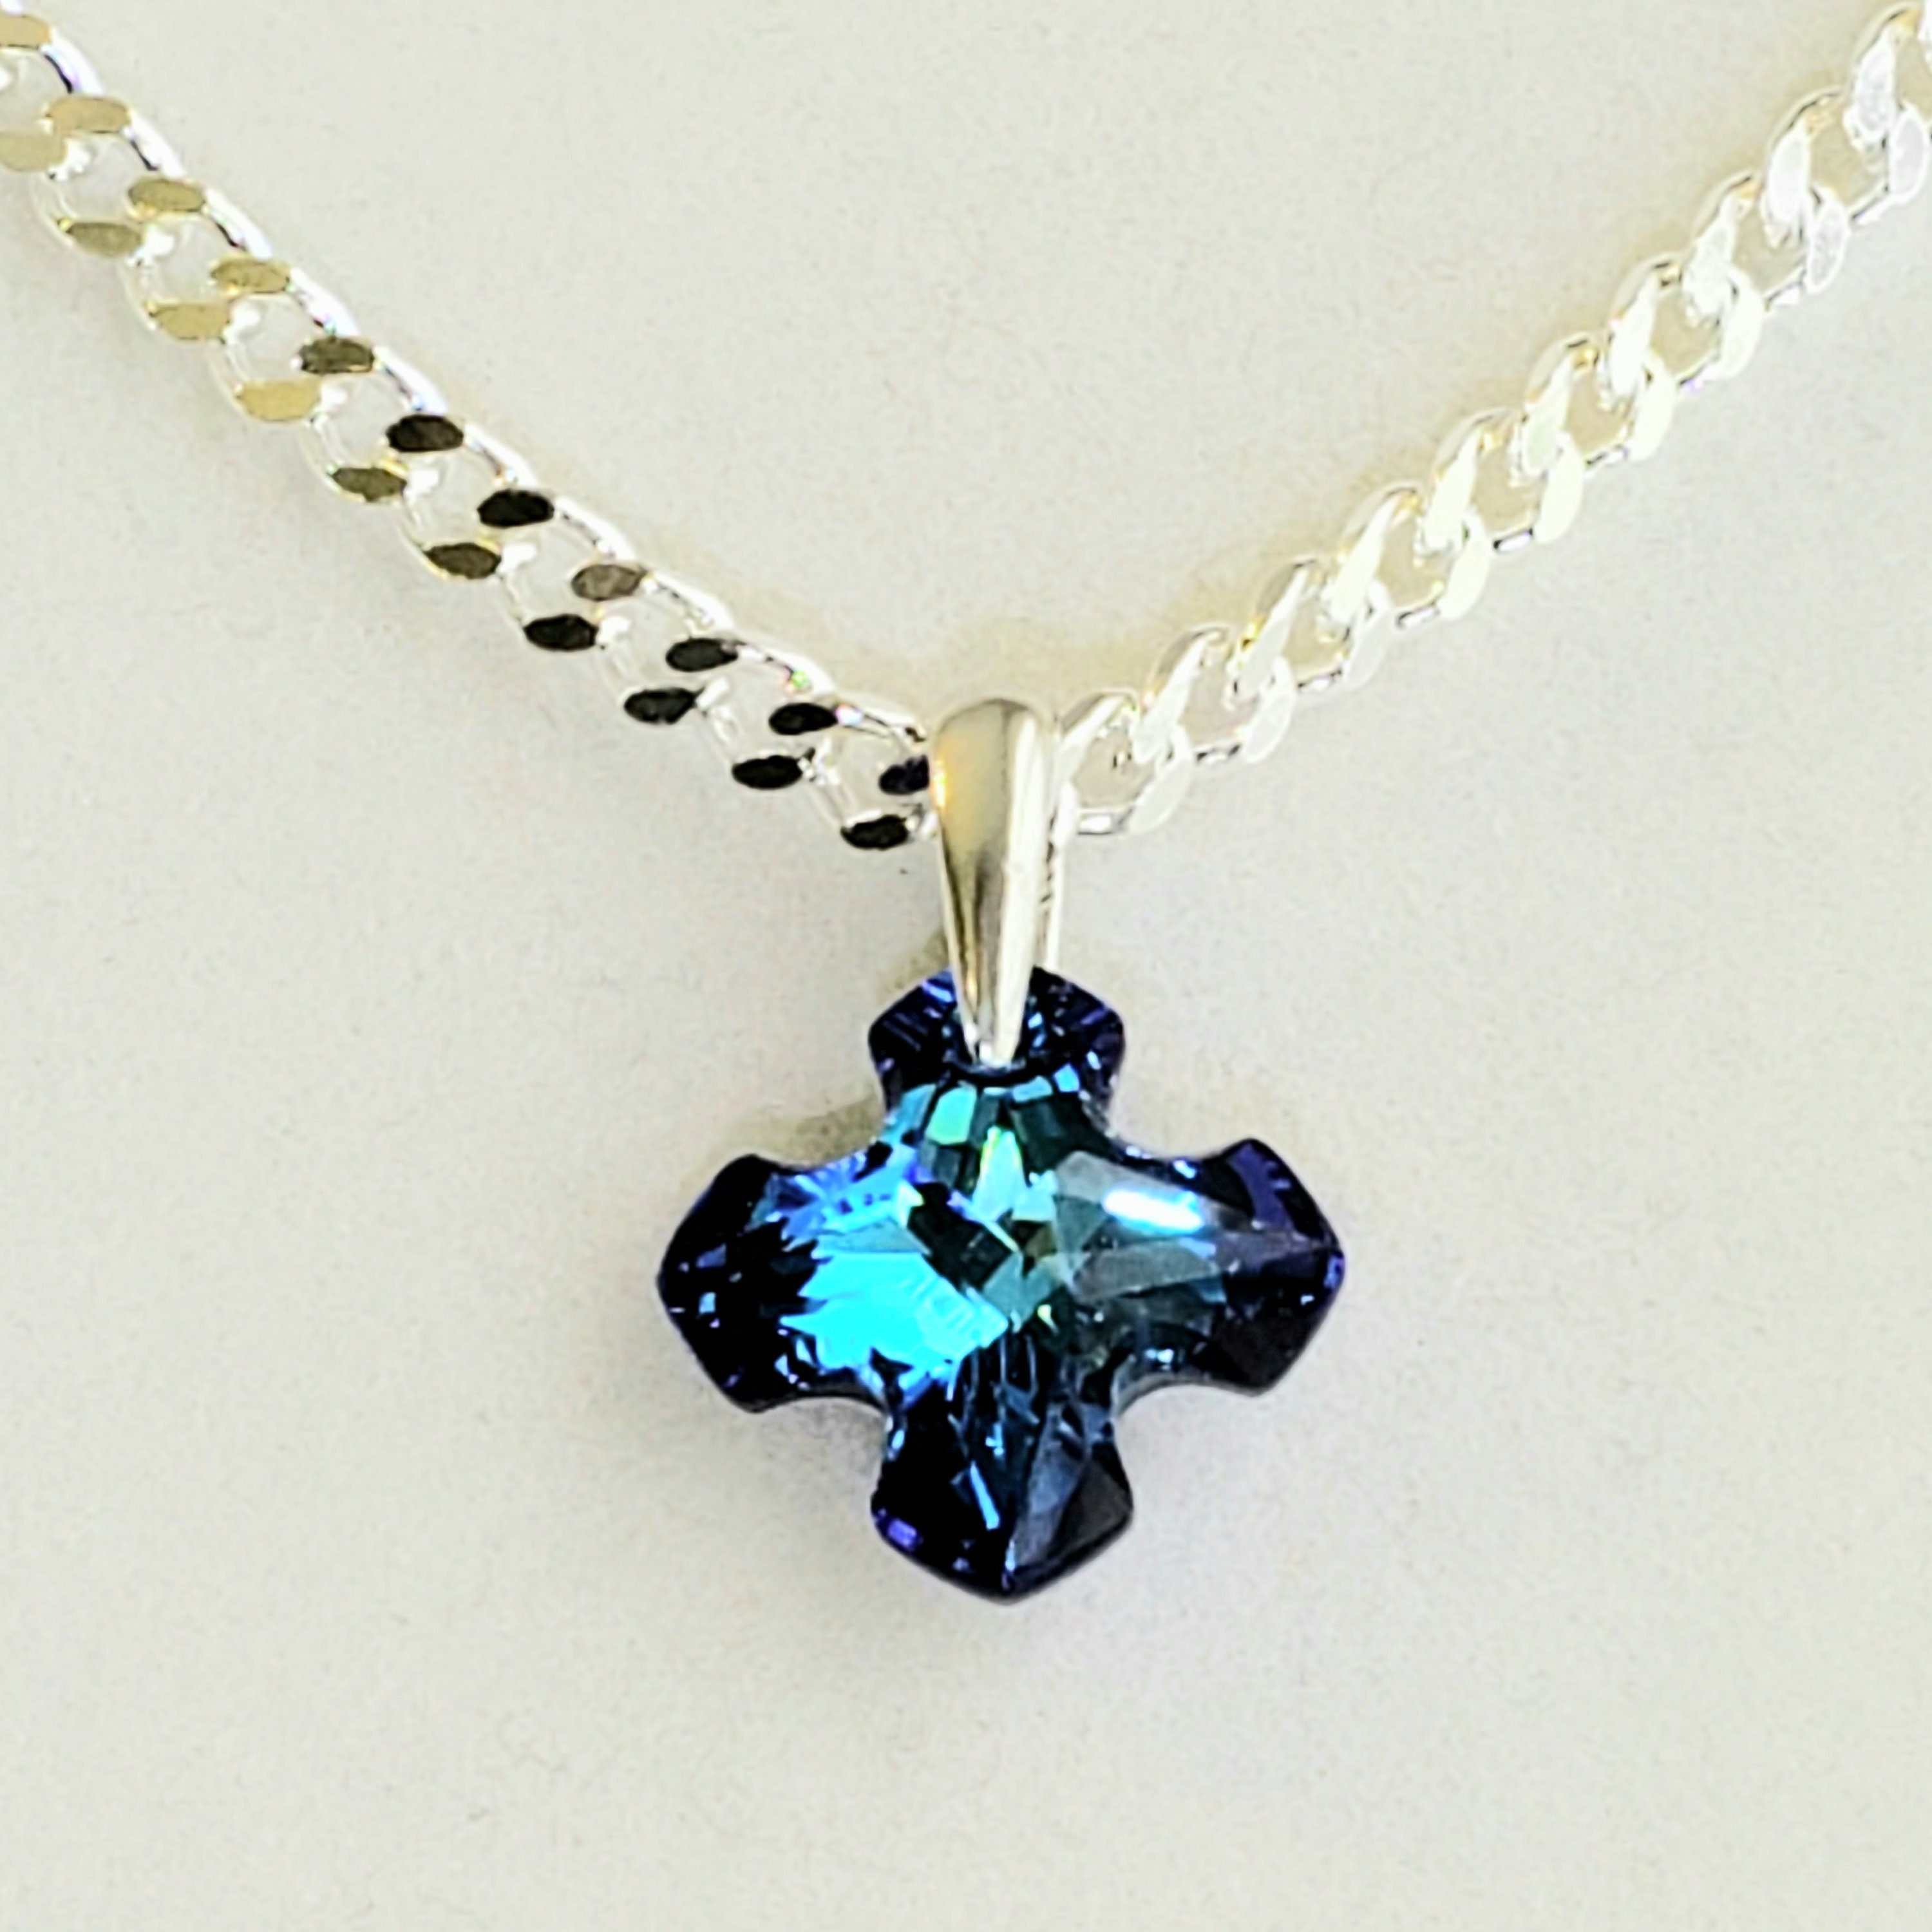 STERLING SILVER CROSS NECKLACE WITH SWAROVSKI CRYSTALS - Kitsinian Jewelers